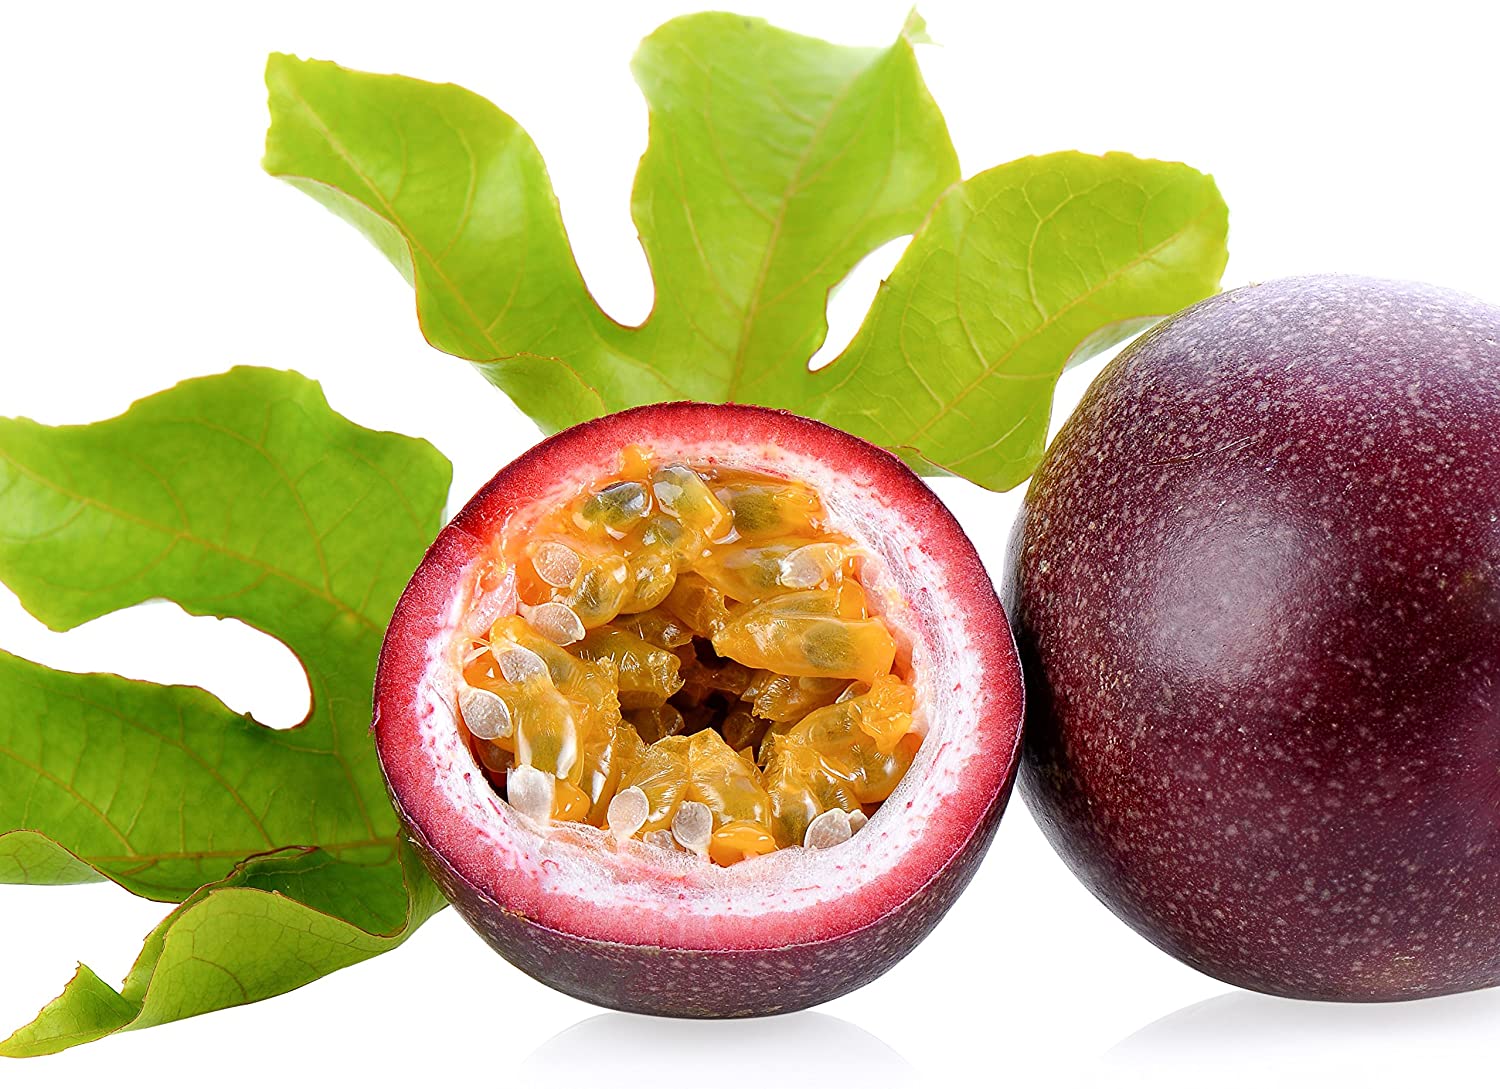 Passion fruit, from this fruit, fatal diseases like cancer and heart attack are removed.